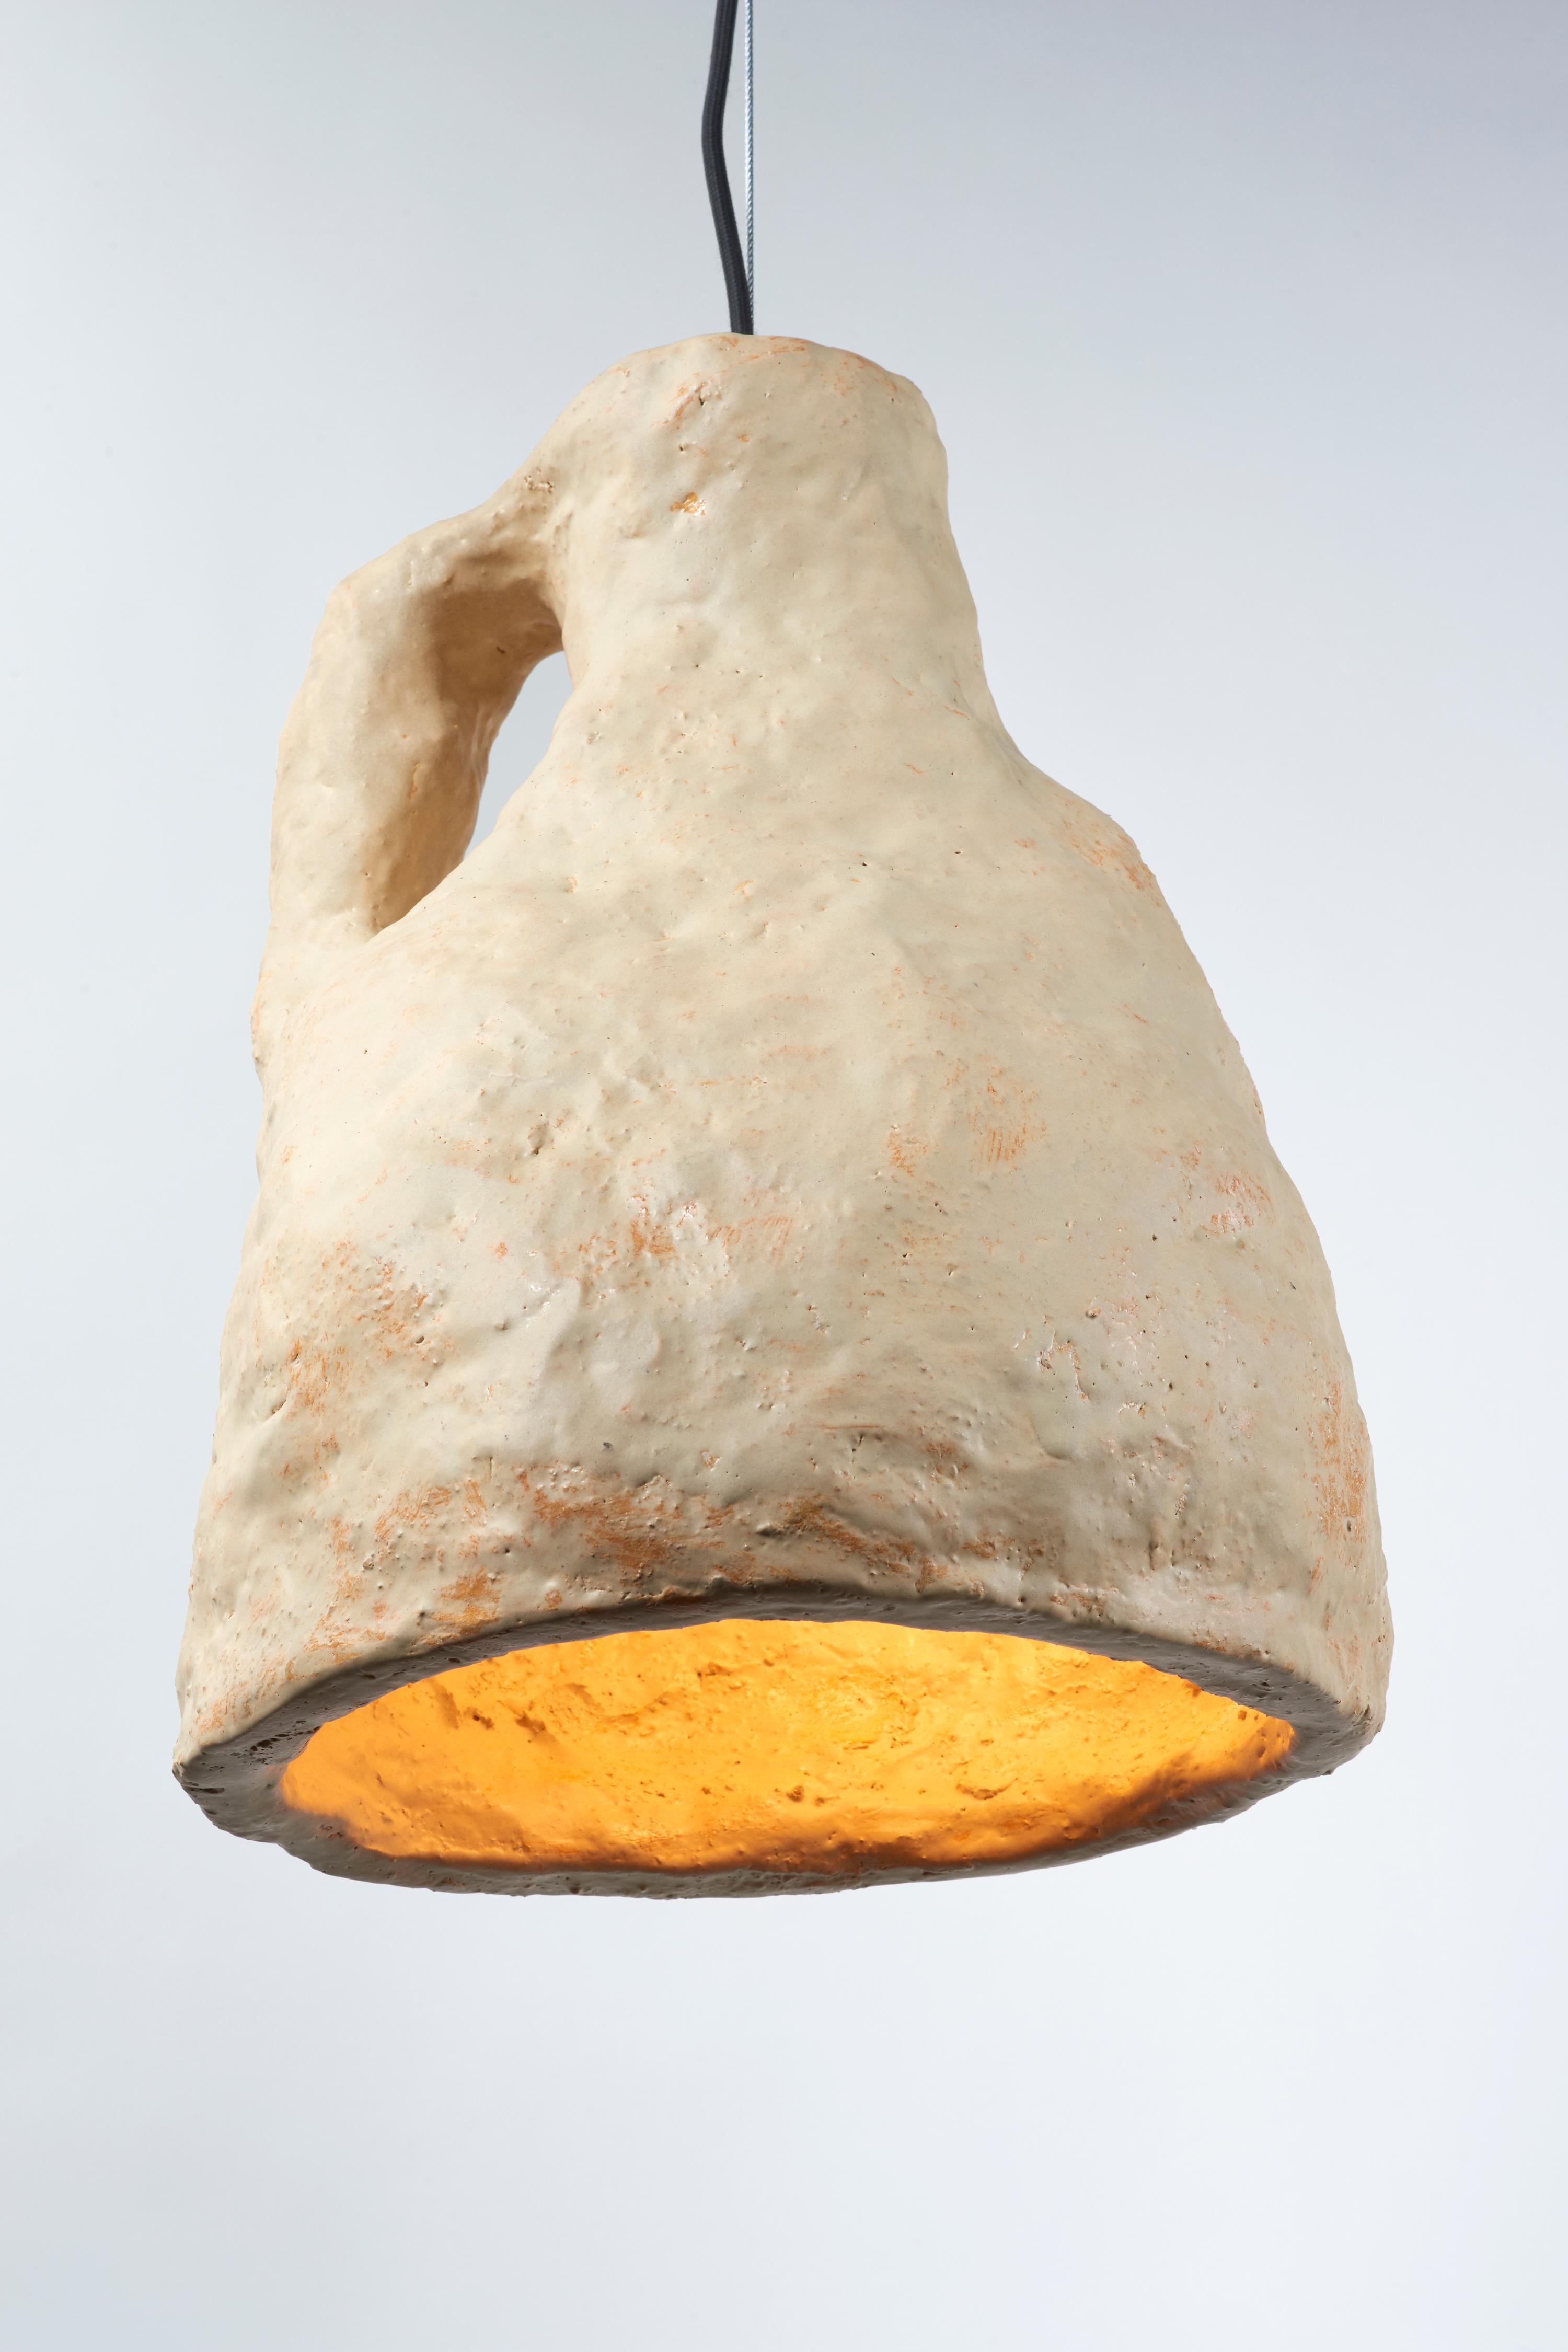 Dual Lamp Ivory Big by Willem Van Hooff
Dimensions: W 35 x H 50 cm (Dimensions may vary as pieces are hand-made and might present slight variations in sizes)
Materials: Earthenware, ceramic, pigments and glaze
Also available in different colours: